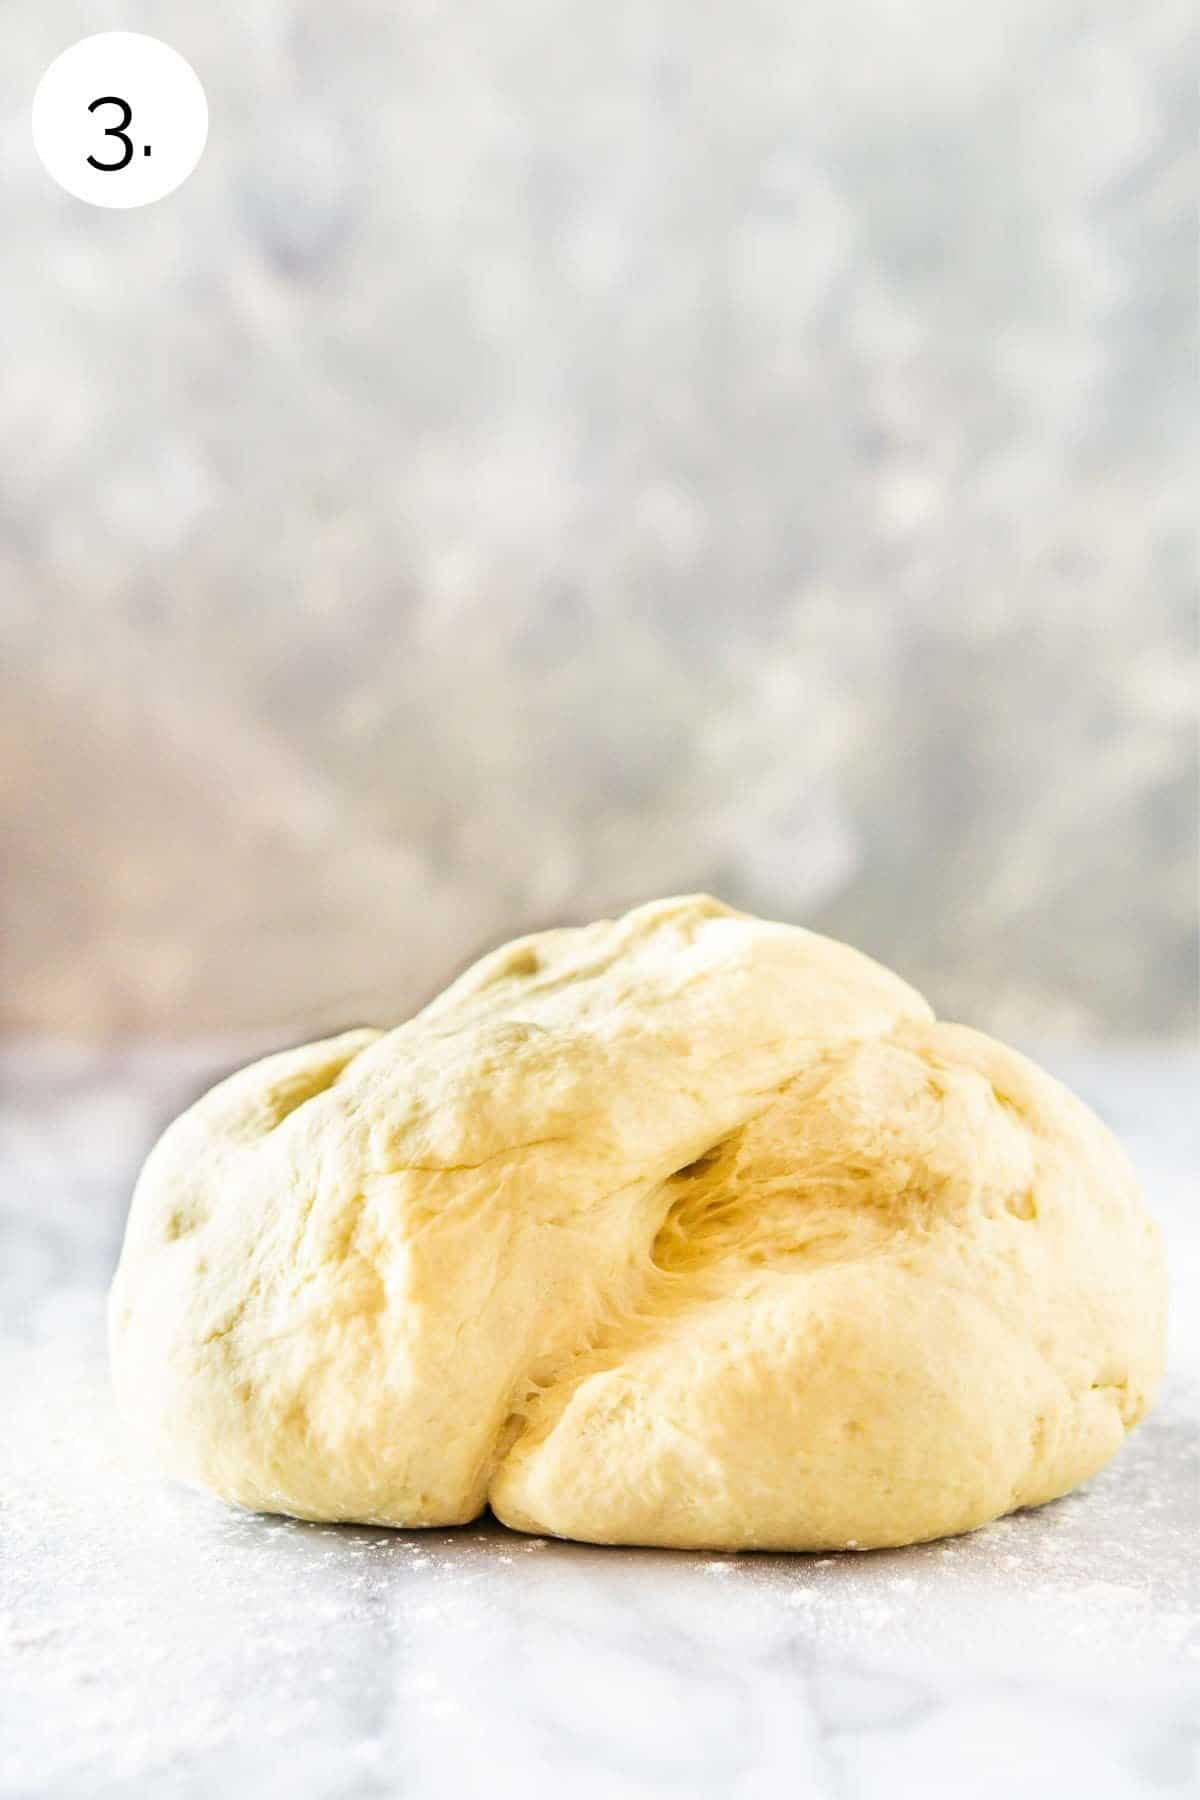 A ball of smooth, elastic, tacky dough after it's been kneaded on a pastry board.